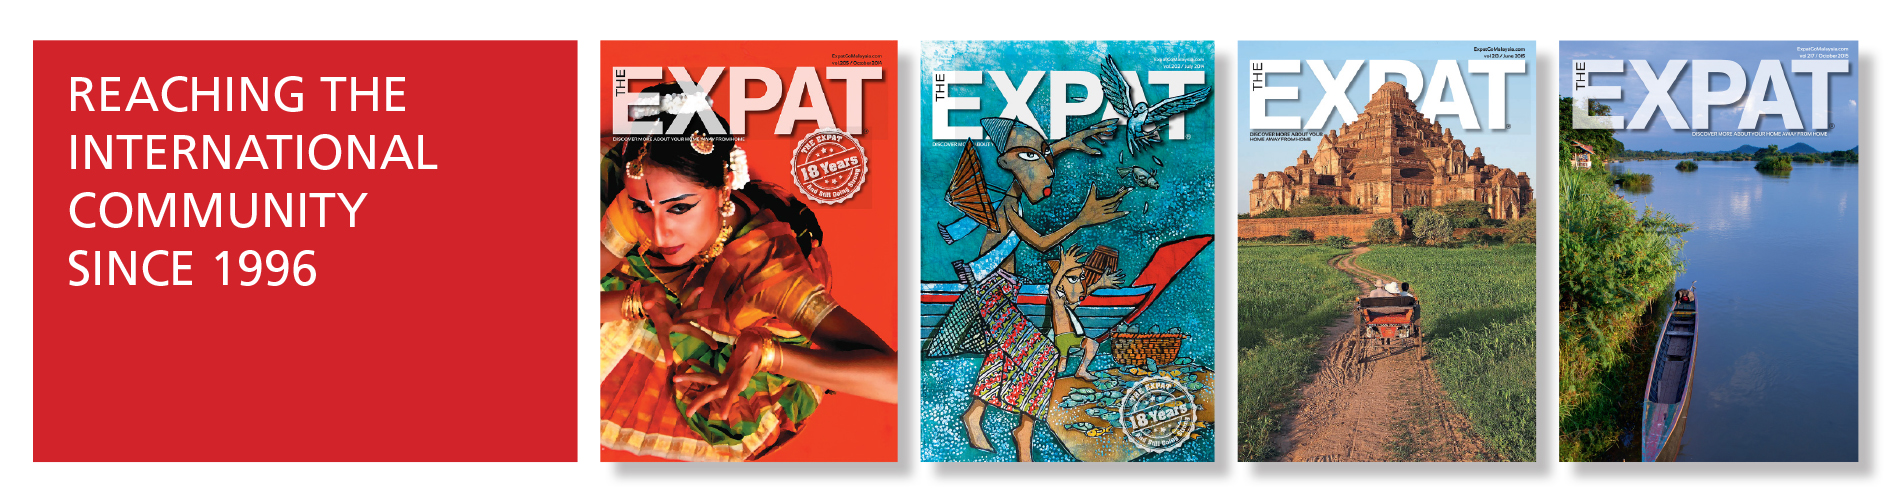 The Expat cover photo